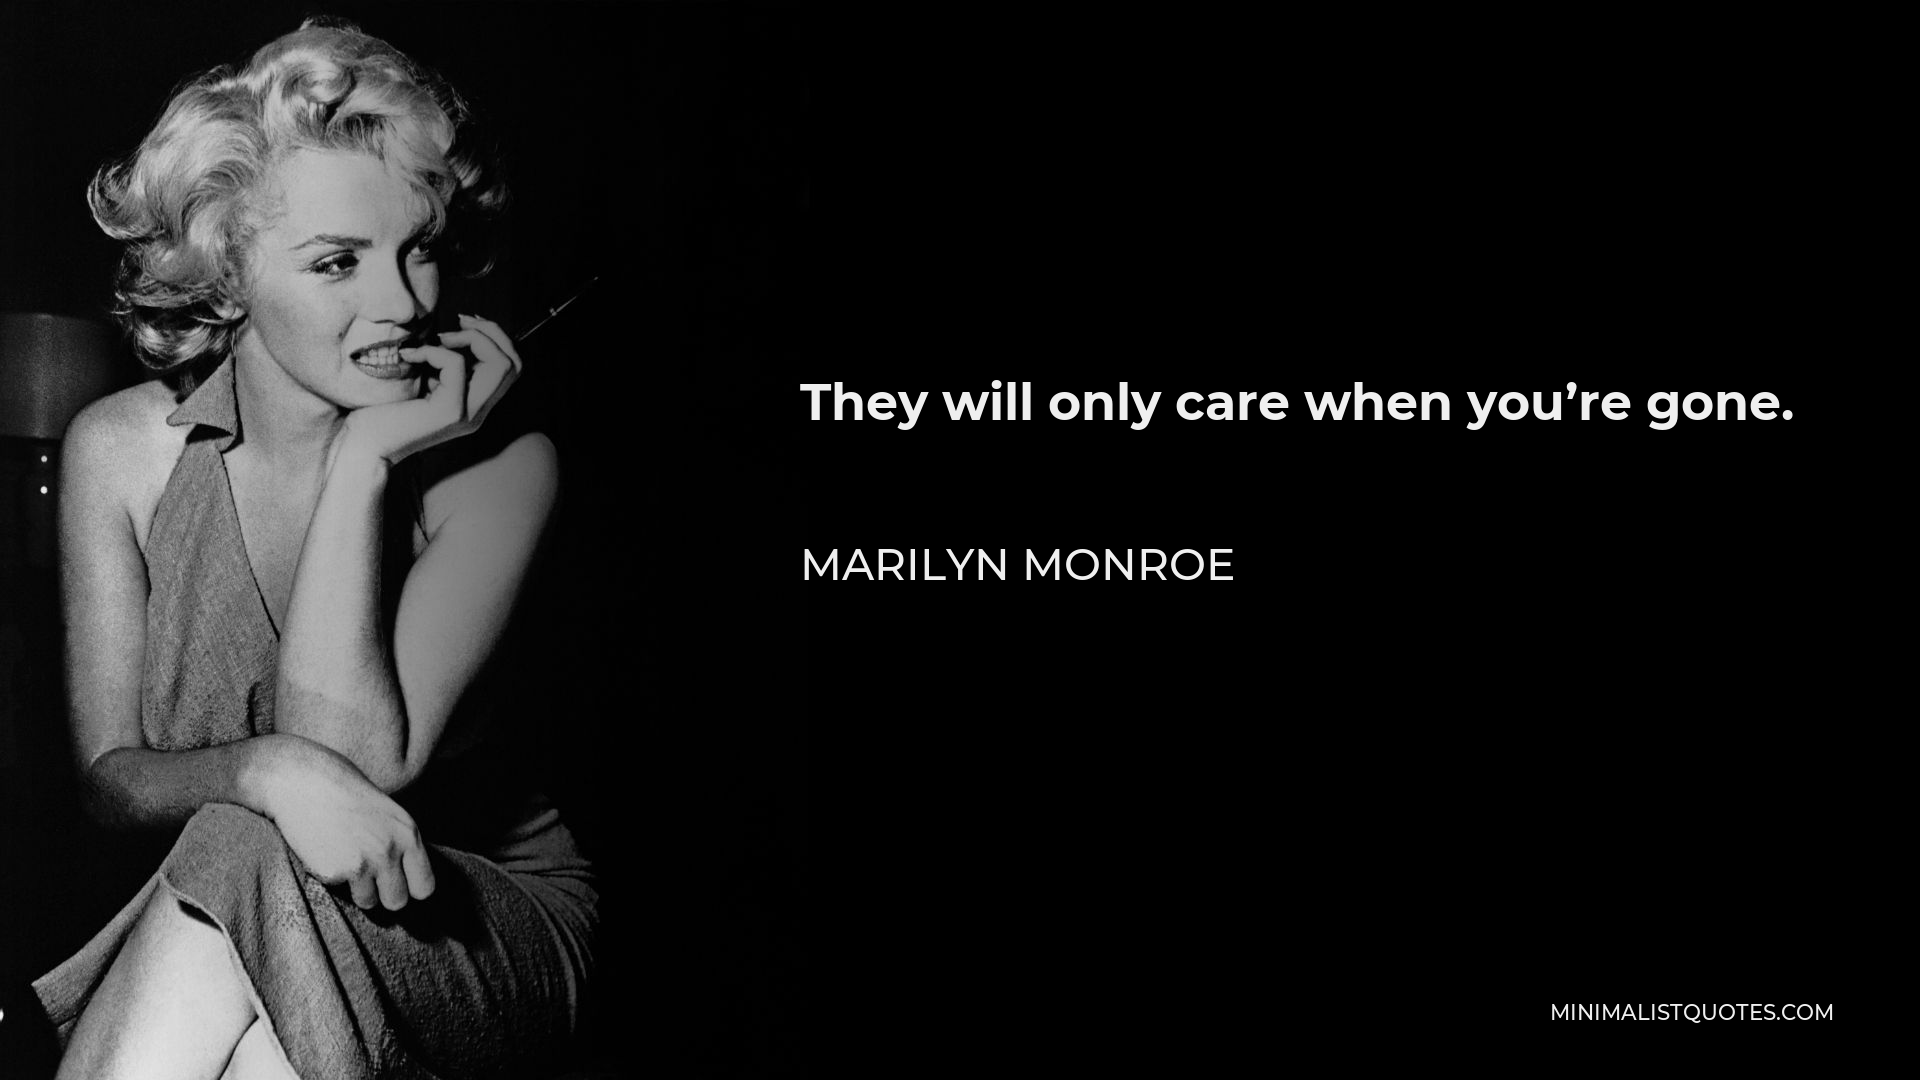 Marilyn Monroe Quote - They will only care when you’re gone.